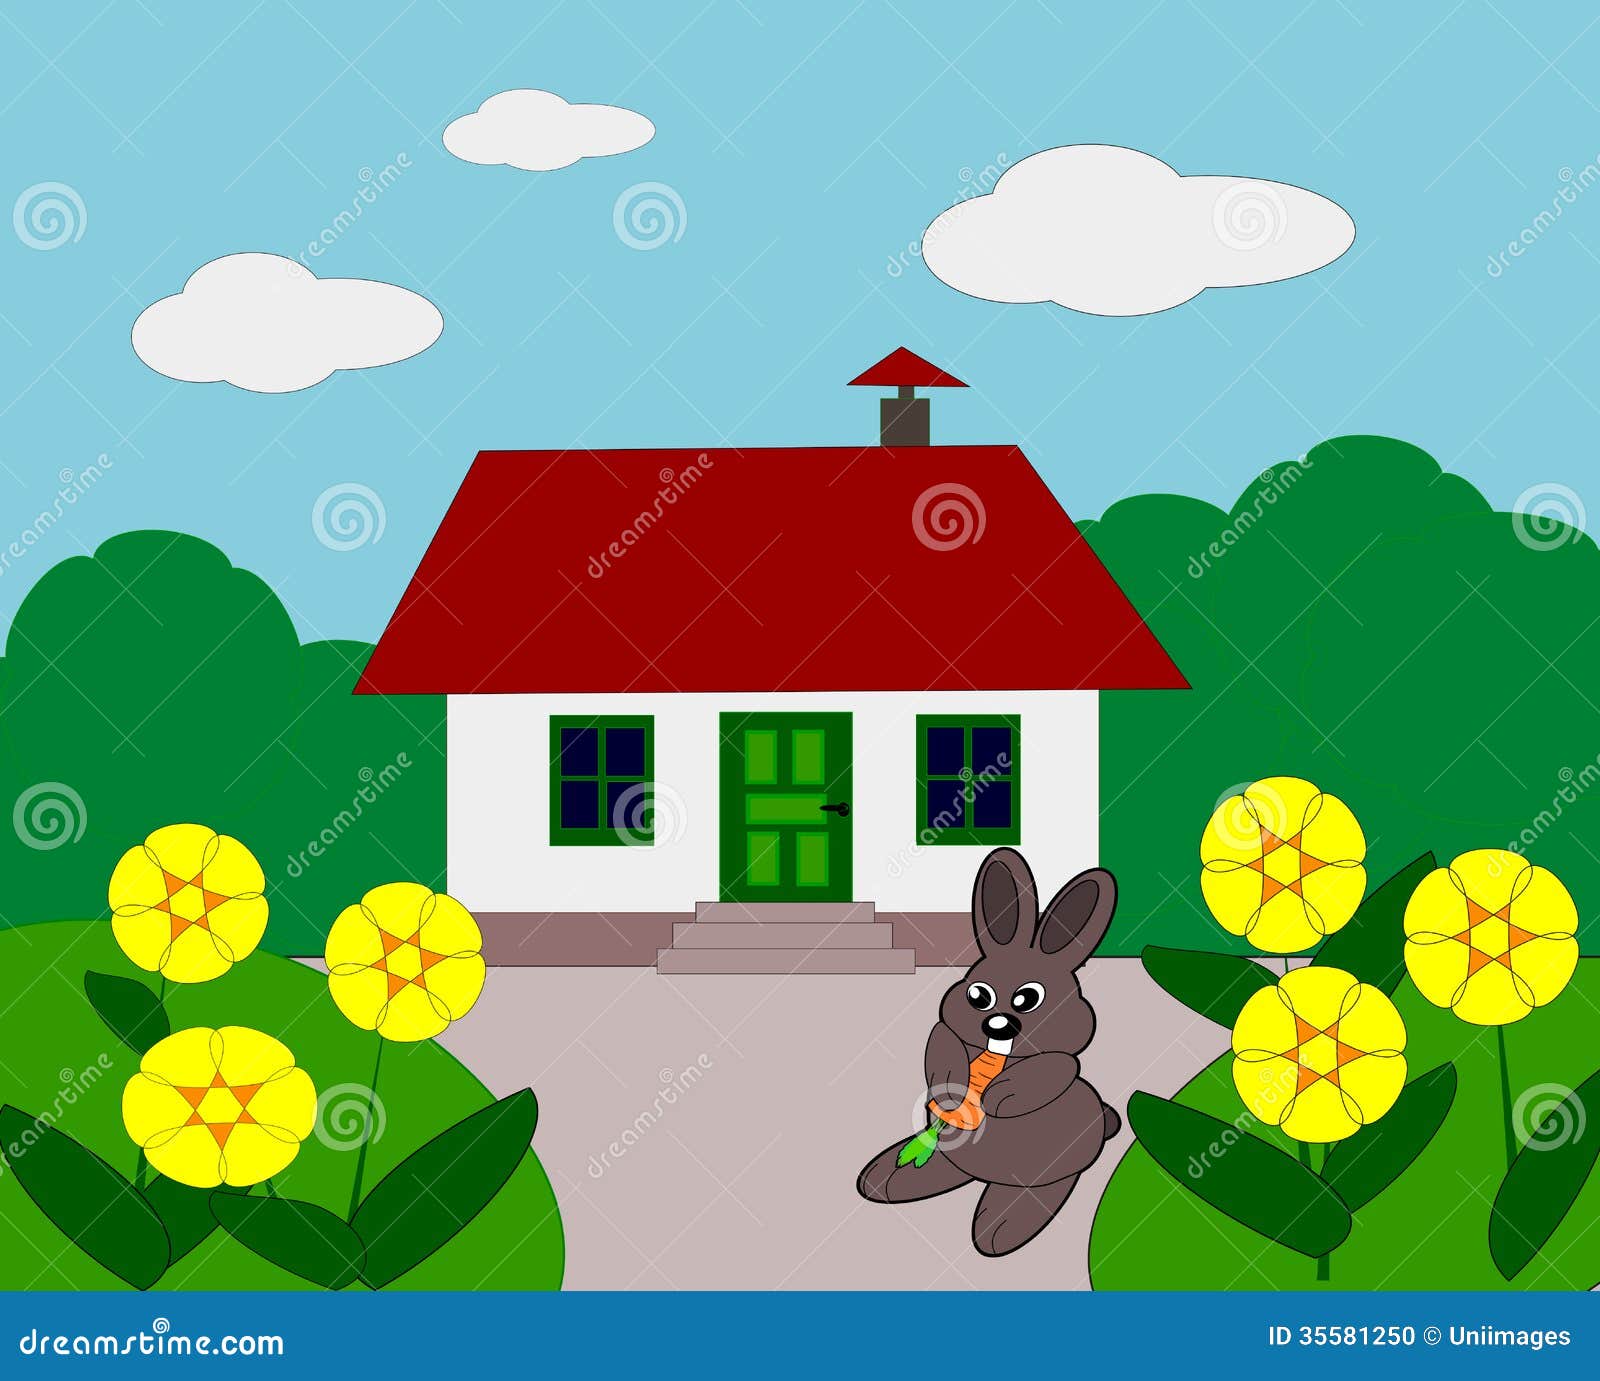 clipart of house with garden - photo #25